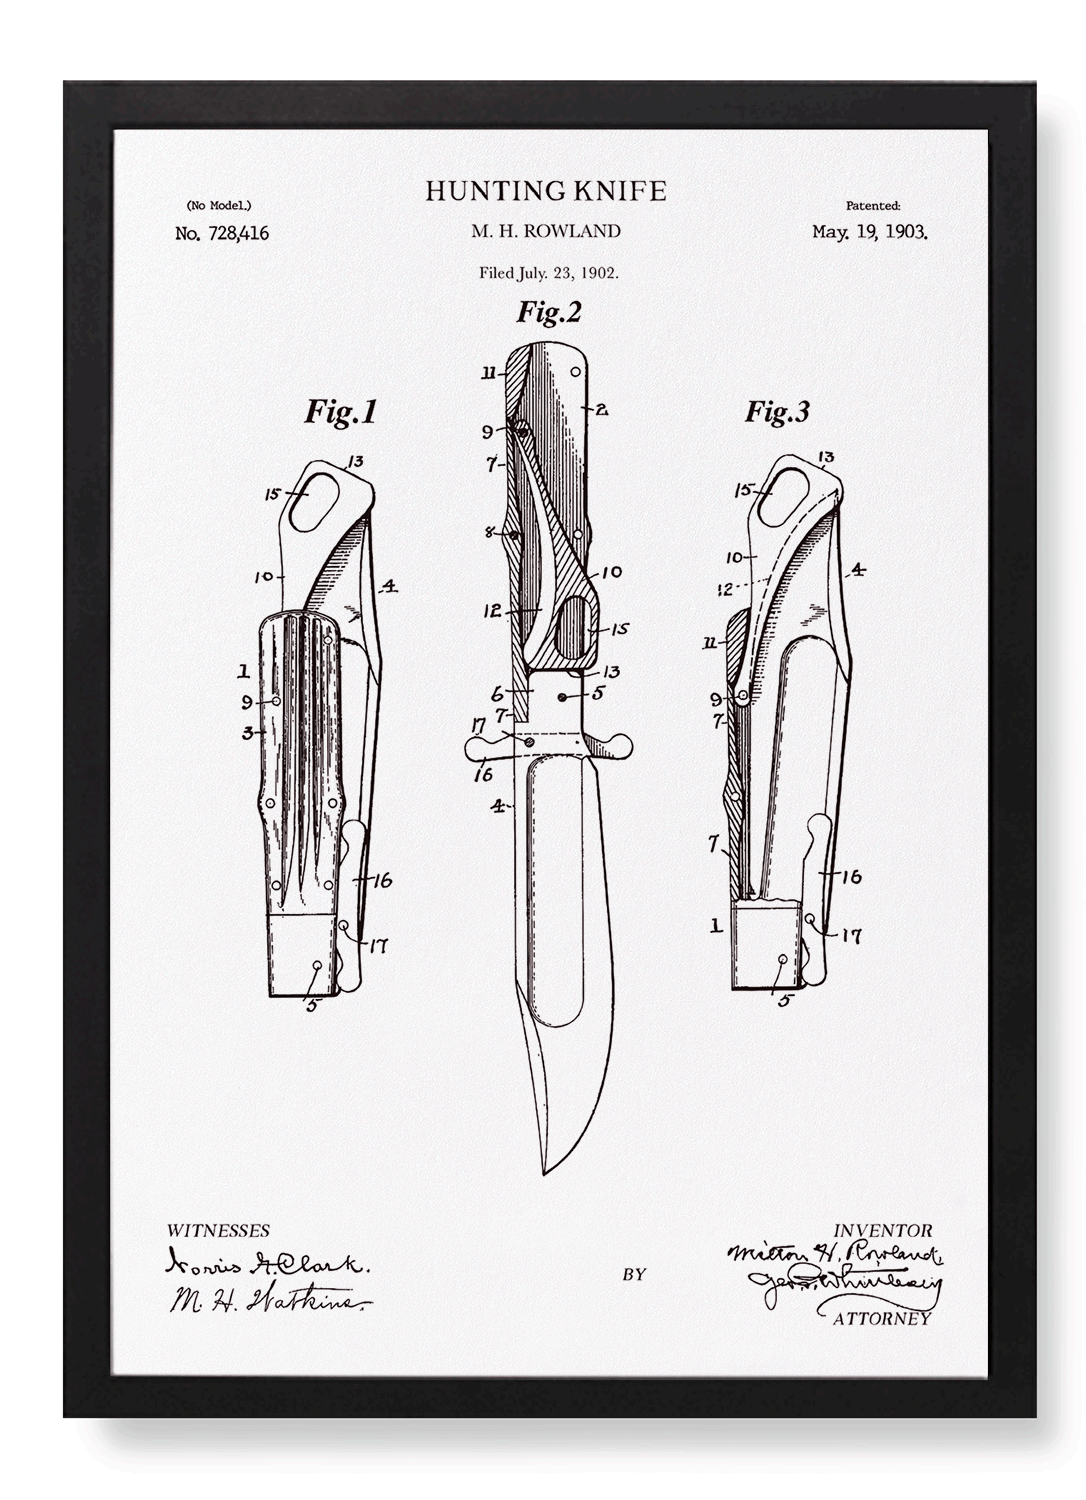 PATENT OF HUNTING KNIFE (1903)